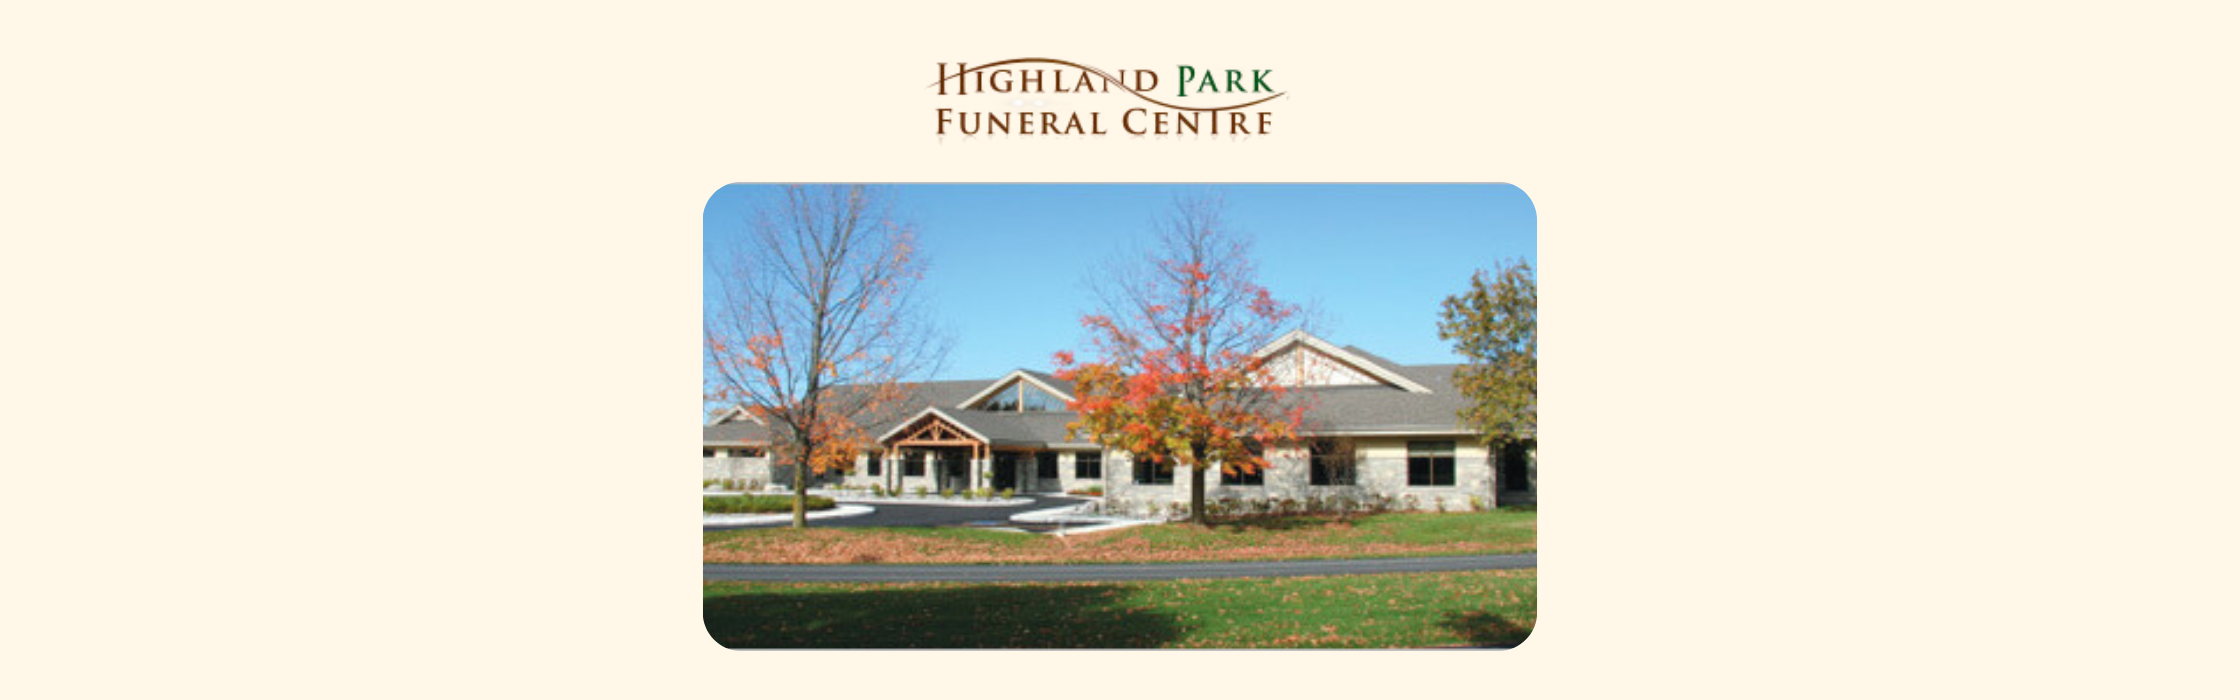 Highland Park Funeral Centre outside chapel with trees and street view 